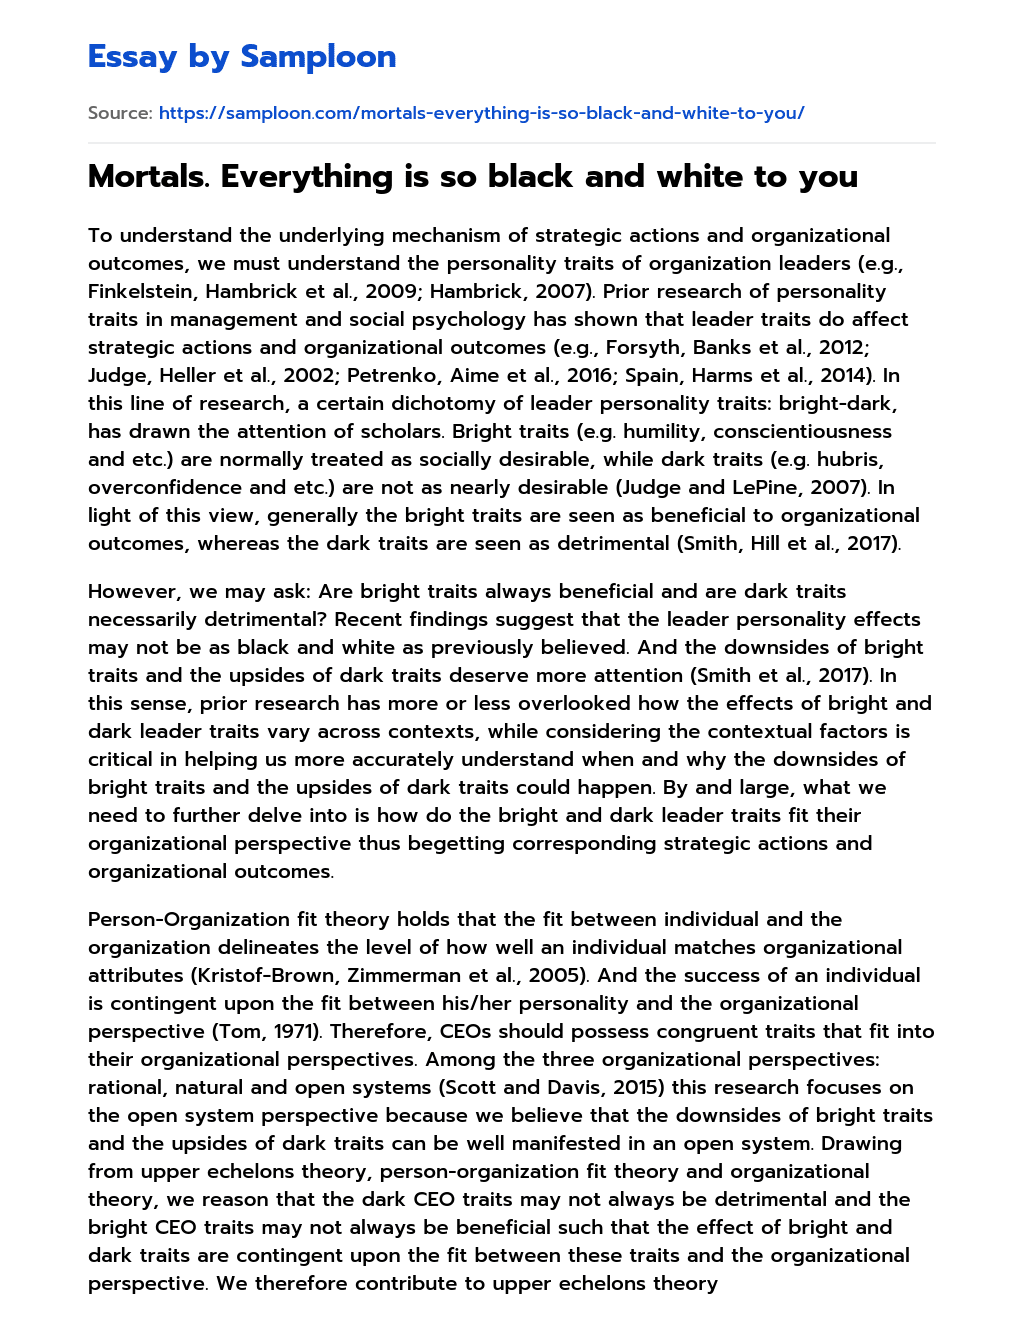 Mortals. Everything is so black and white to you essay